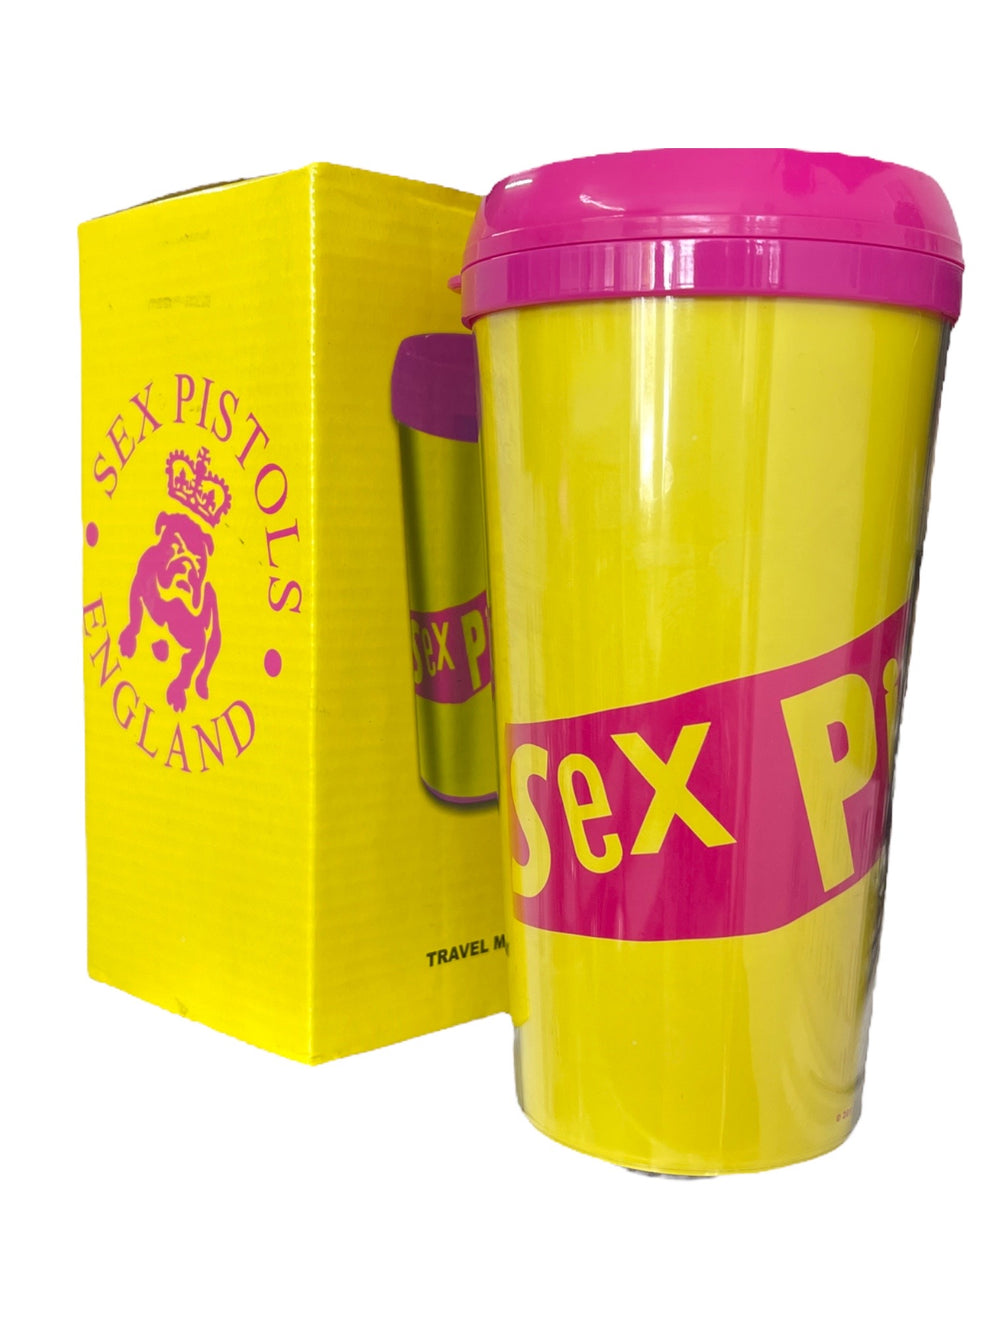 Sex Pistols The Yellow Plastic Travel Mug Boxed Official Brand New